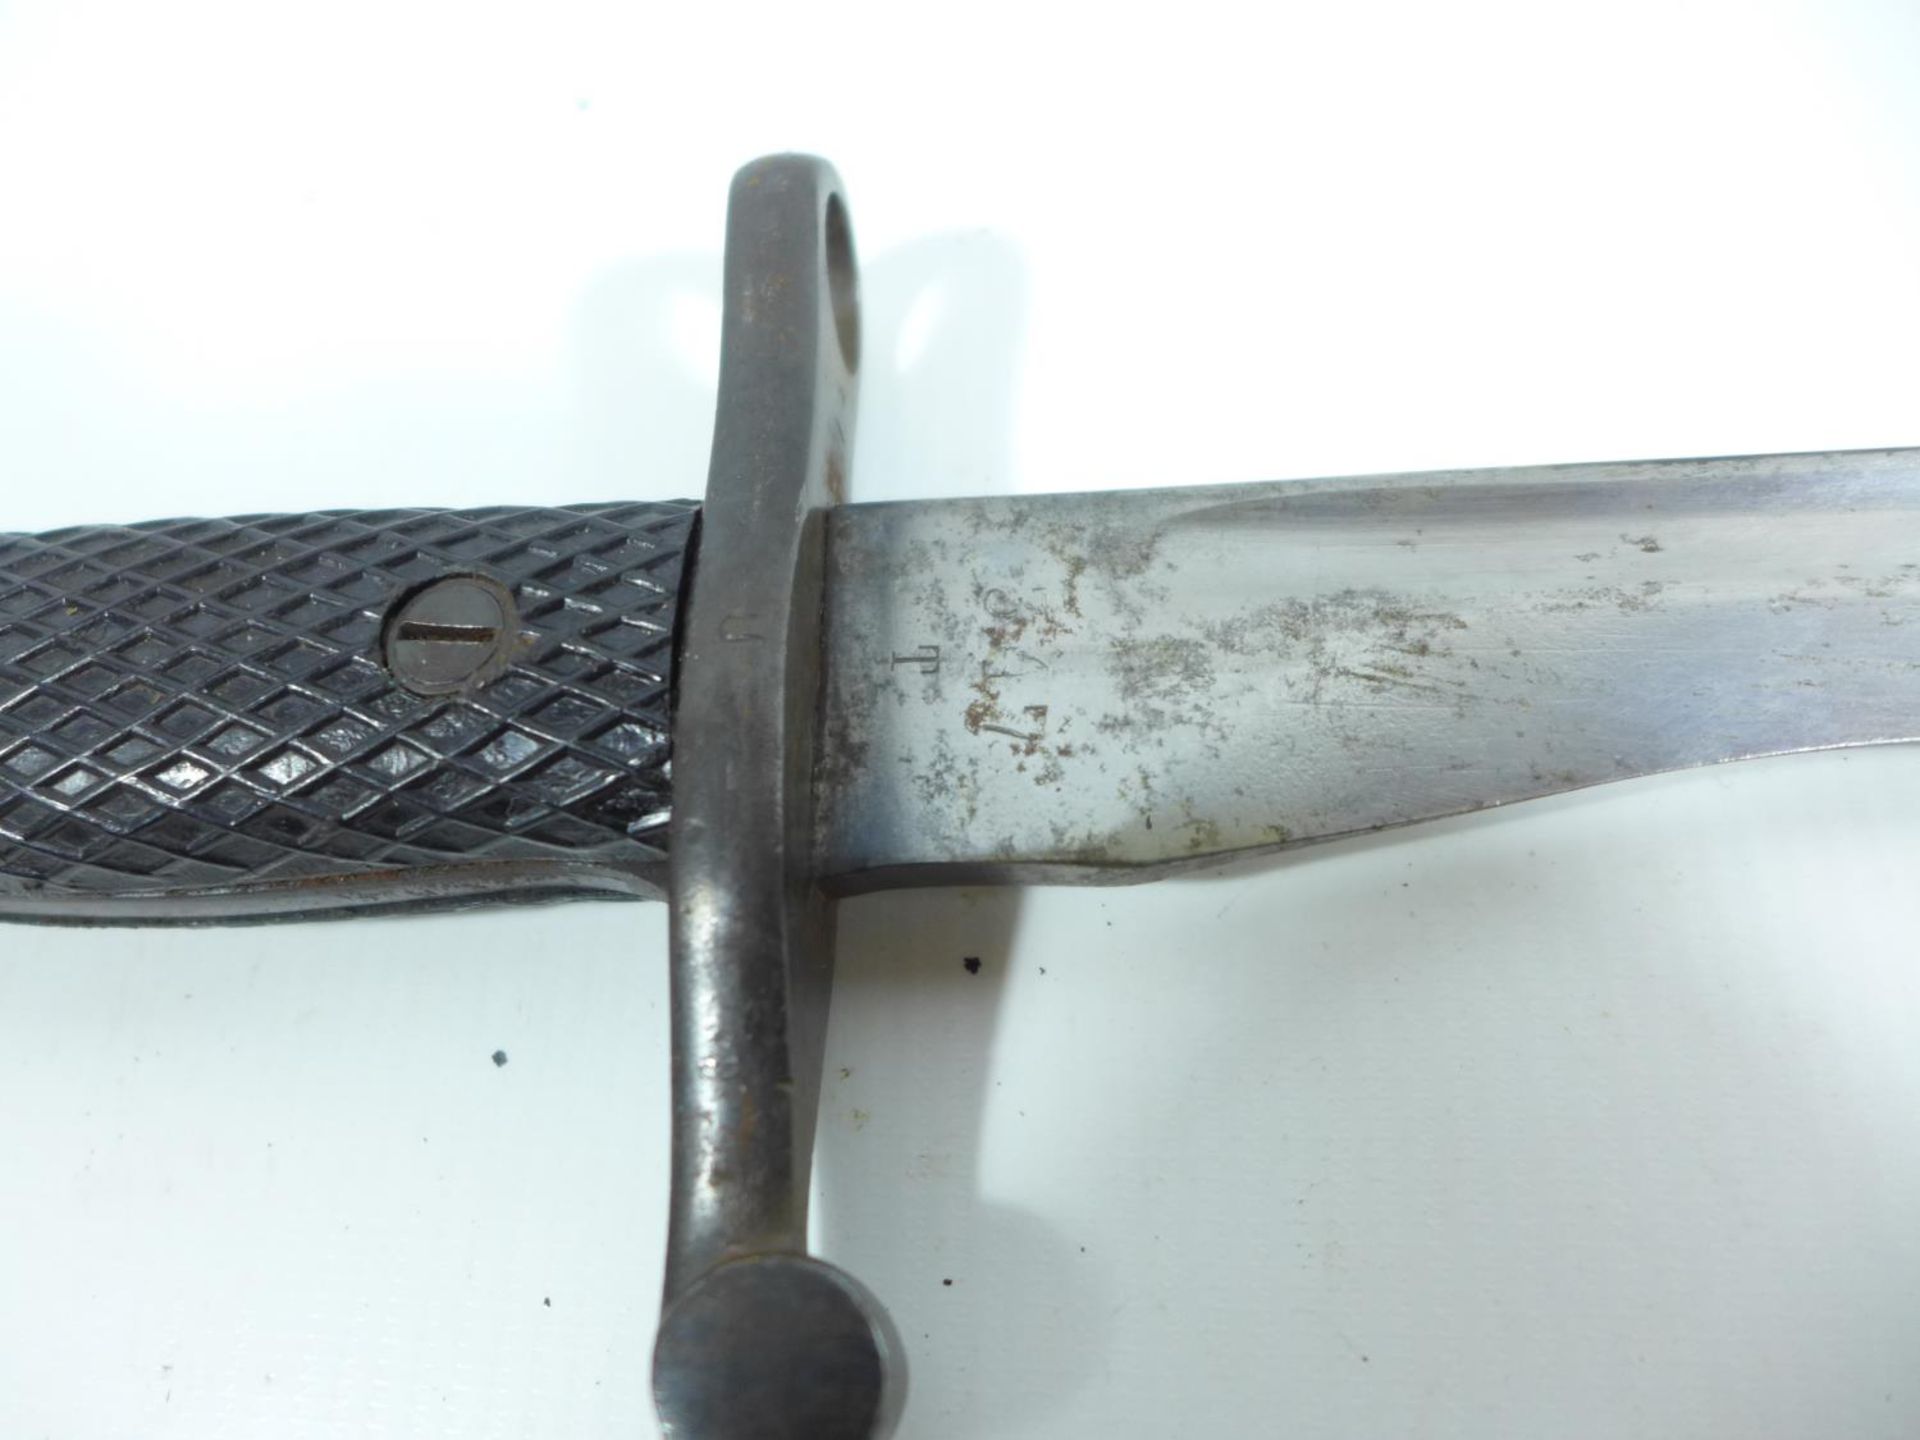 A SPANISH BOLO BAYONET AND SCABBARD, BLADE 24.5CM, LENGTH 40CM - Image 2 of 5